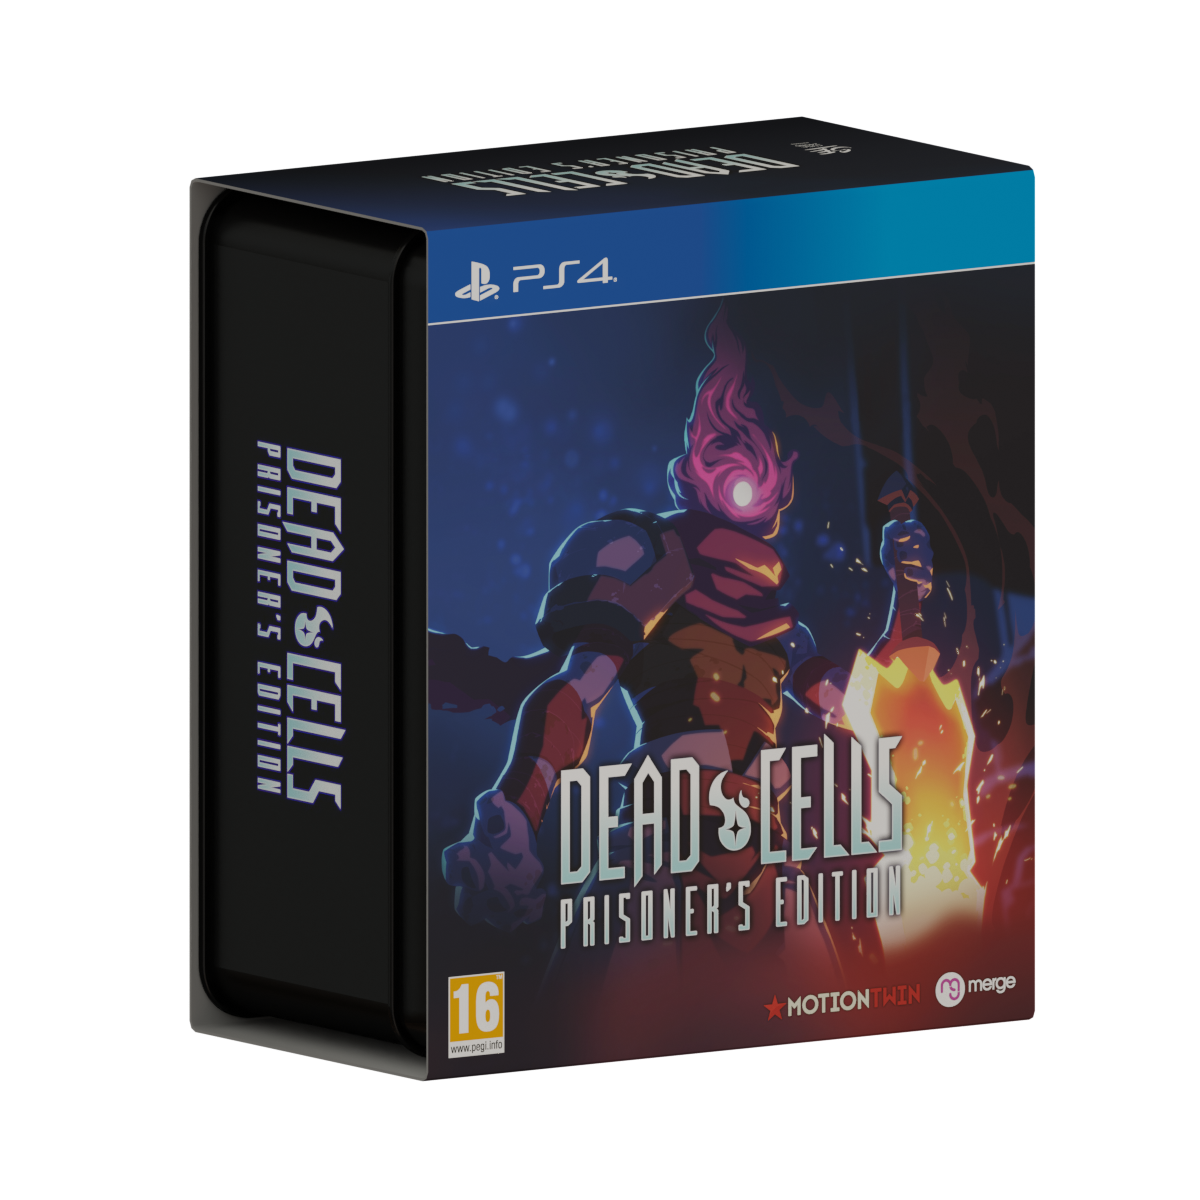  The Dead Cells-Prisoner's Edition - PlayStation 4 : Video Games